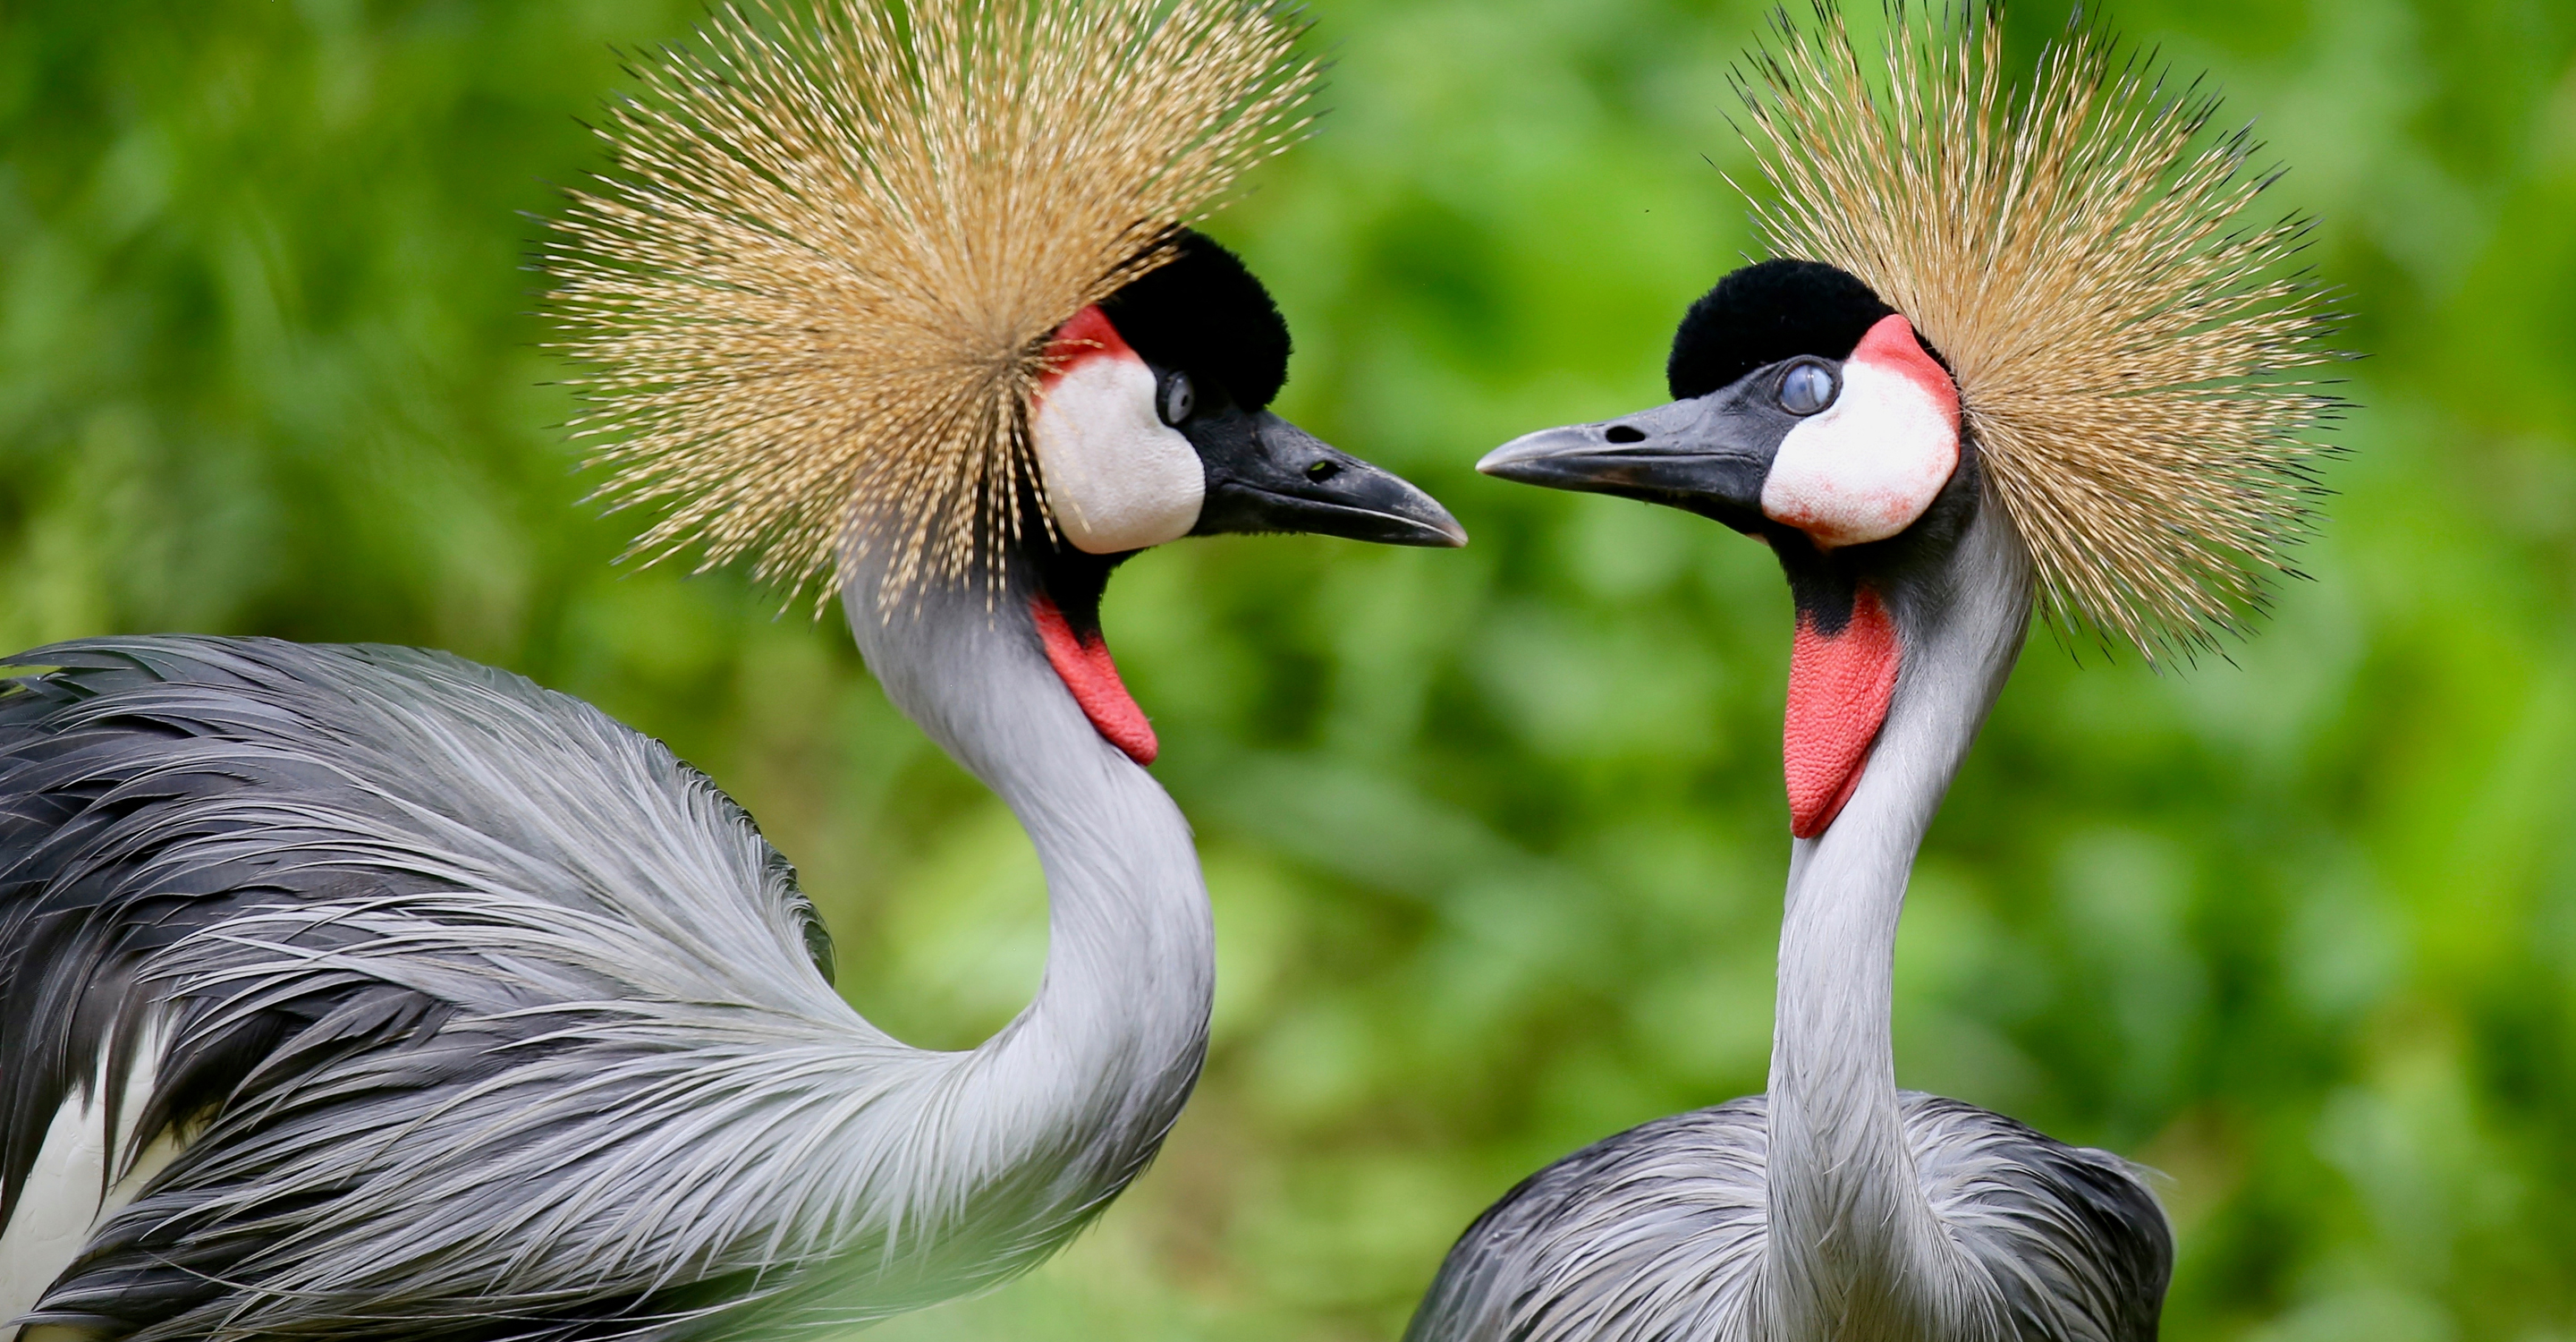 Two gray crowned cranes in Bwindi Impenetrable National Park, Uganda